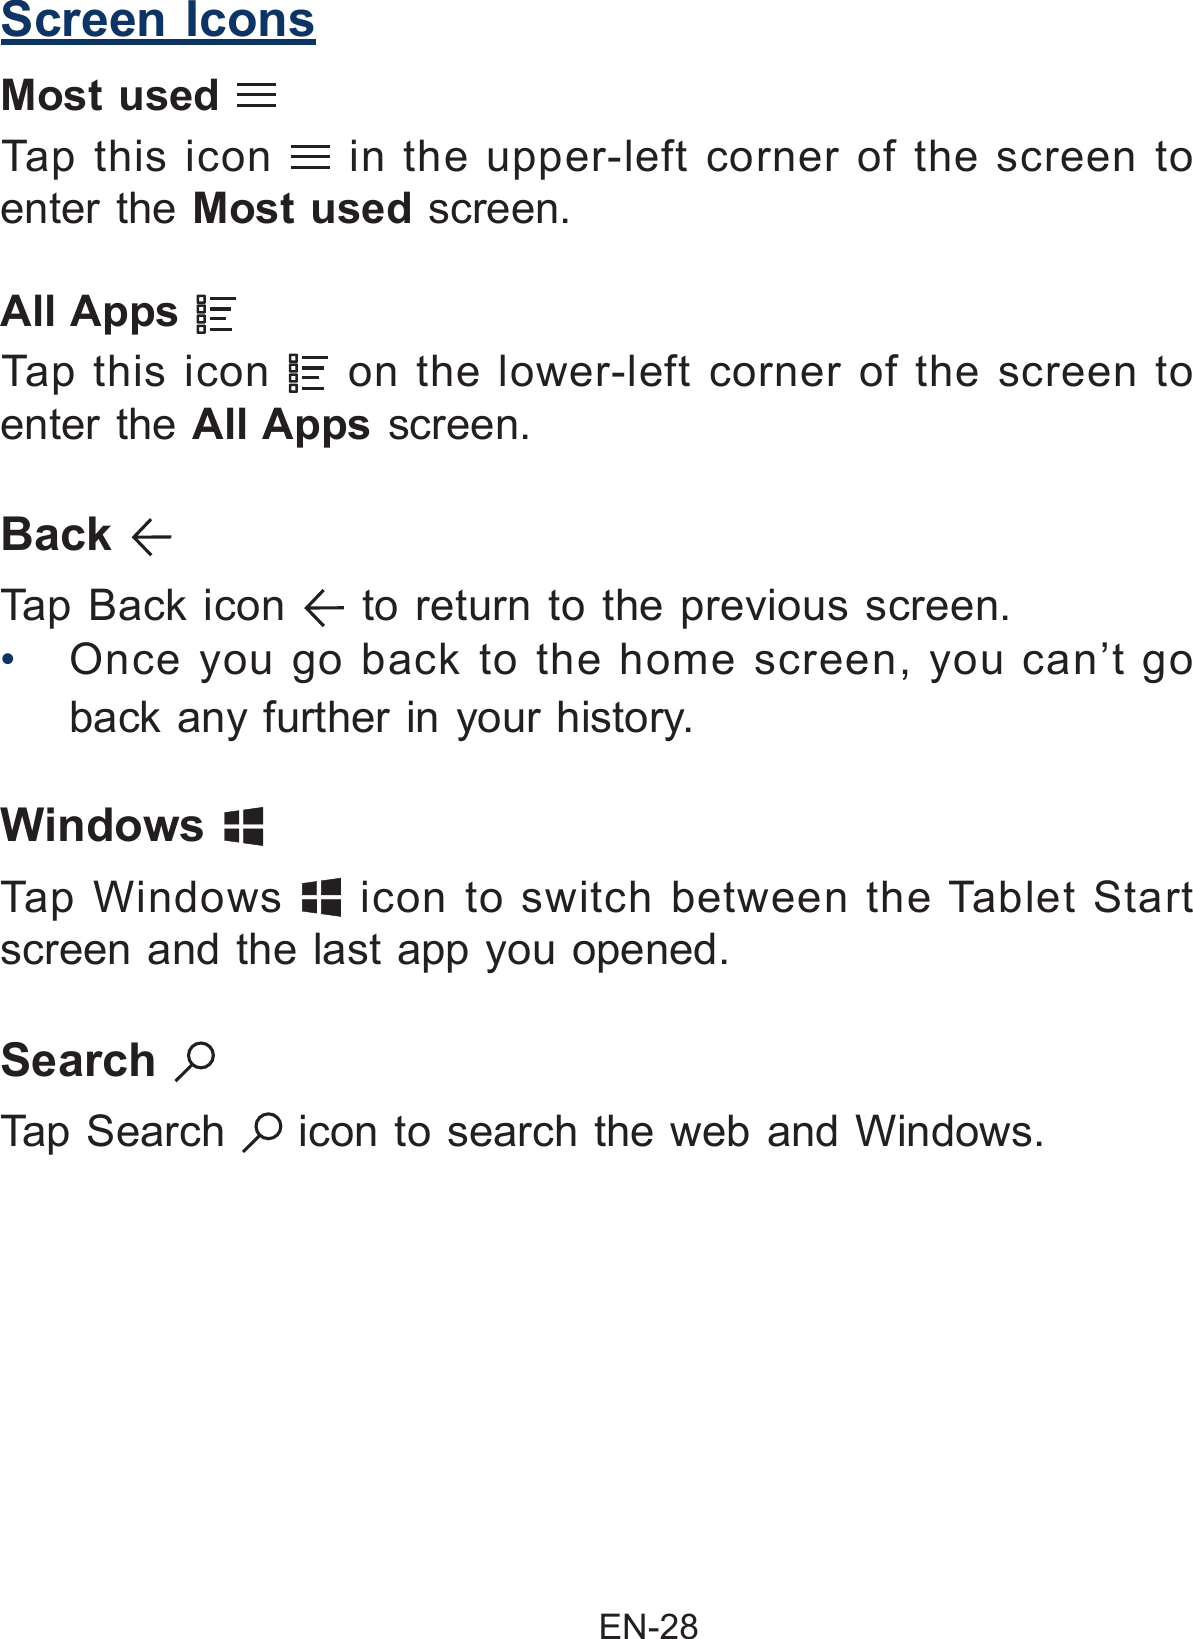                                                EN-28 Screen IconsMost used     Tap this icon   in the upper-left corner of the screen to enter the Most used screen. Back   Tap Back icon   to return to the previous screen.• Once you go back to the home screen, you can’t go back any further in your history.Windows   Tap Windows   icon to switch between the Tablet Start screen and the last app you opened.All Apps     Tap this icon   on the lower-left corner of the screen to enter the All Apps screen.Search   Tap Search   icon to search the web and Windows.